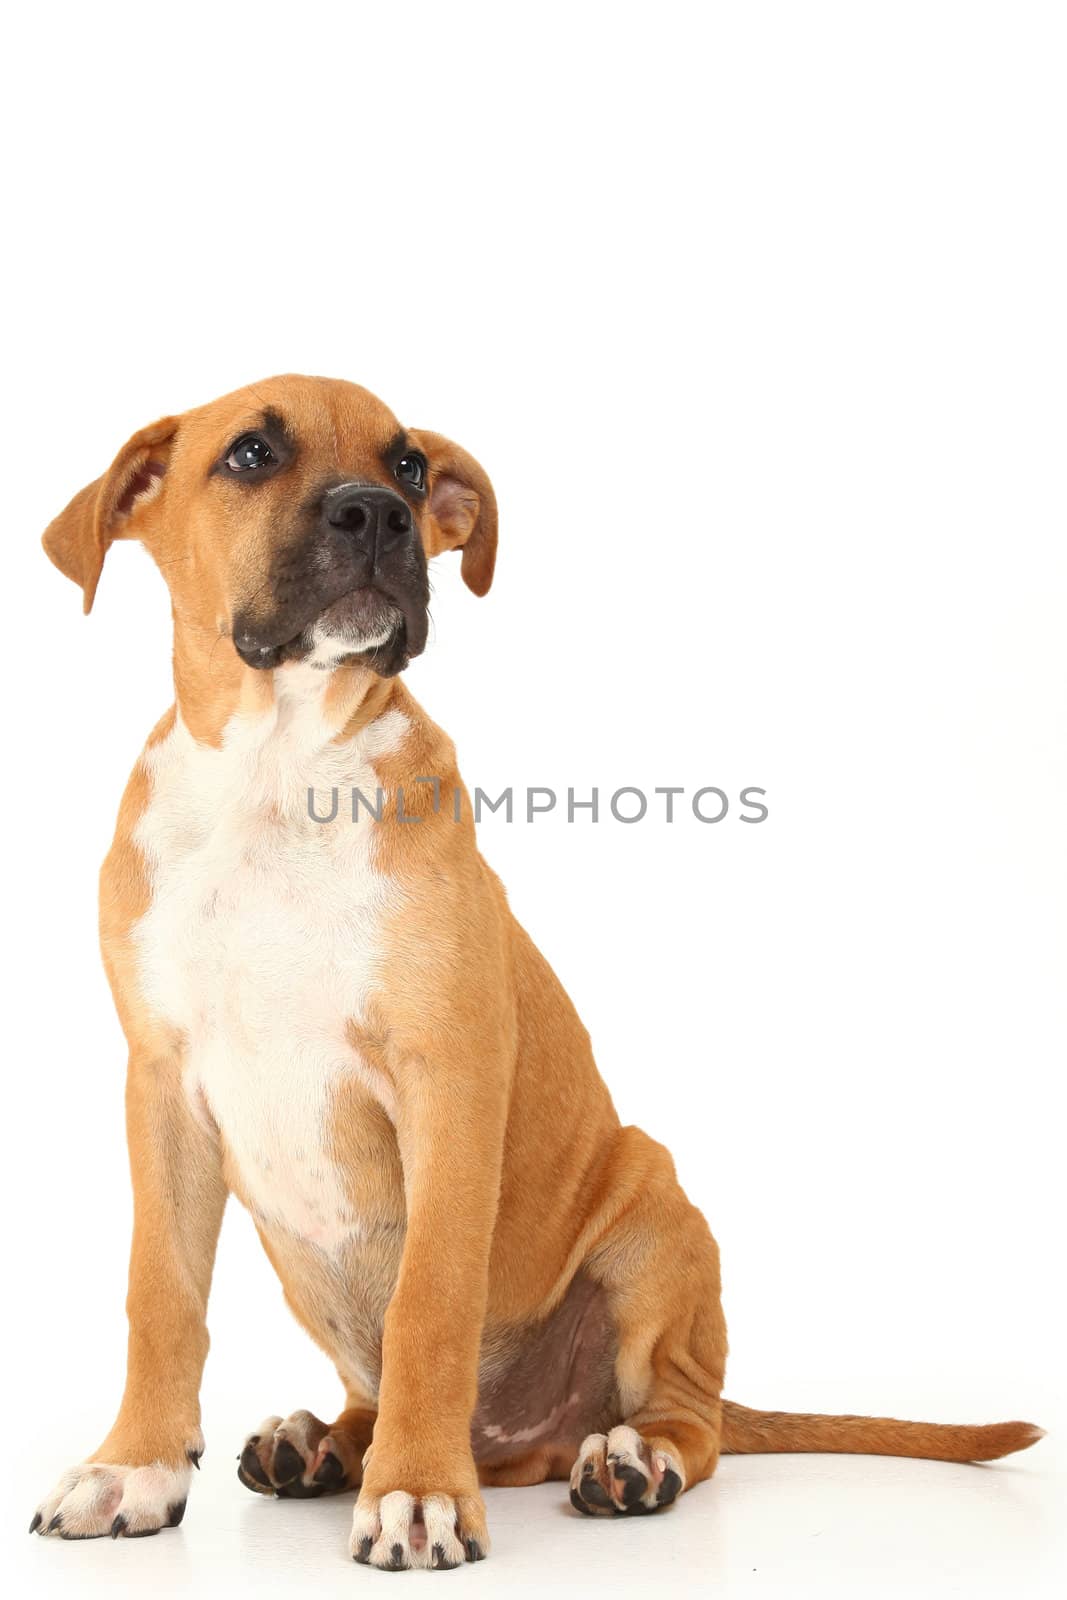 Adorable boxer puppy sitting and looking to side over white background.